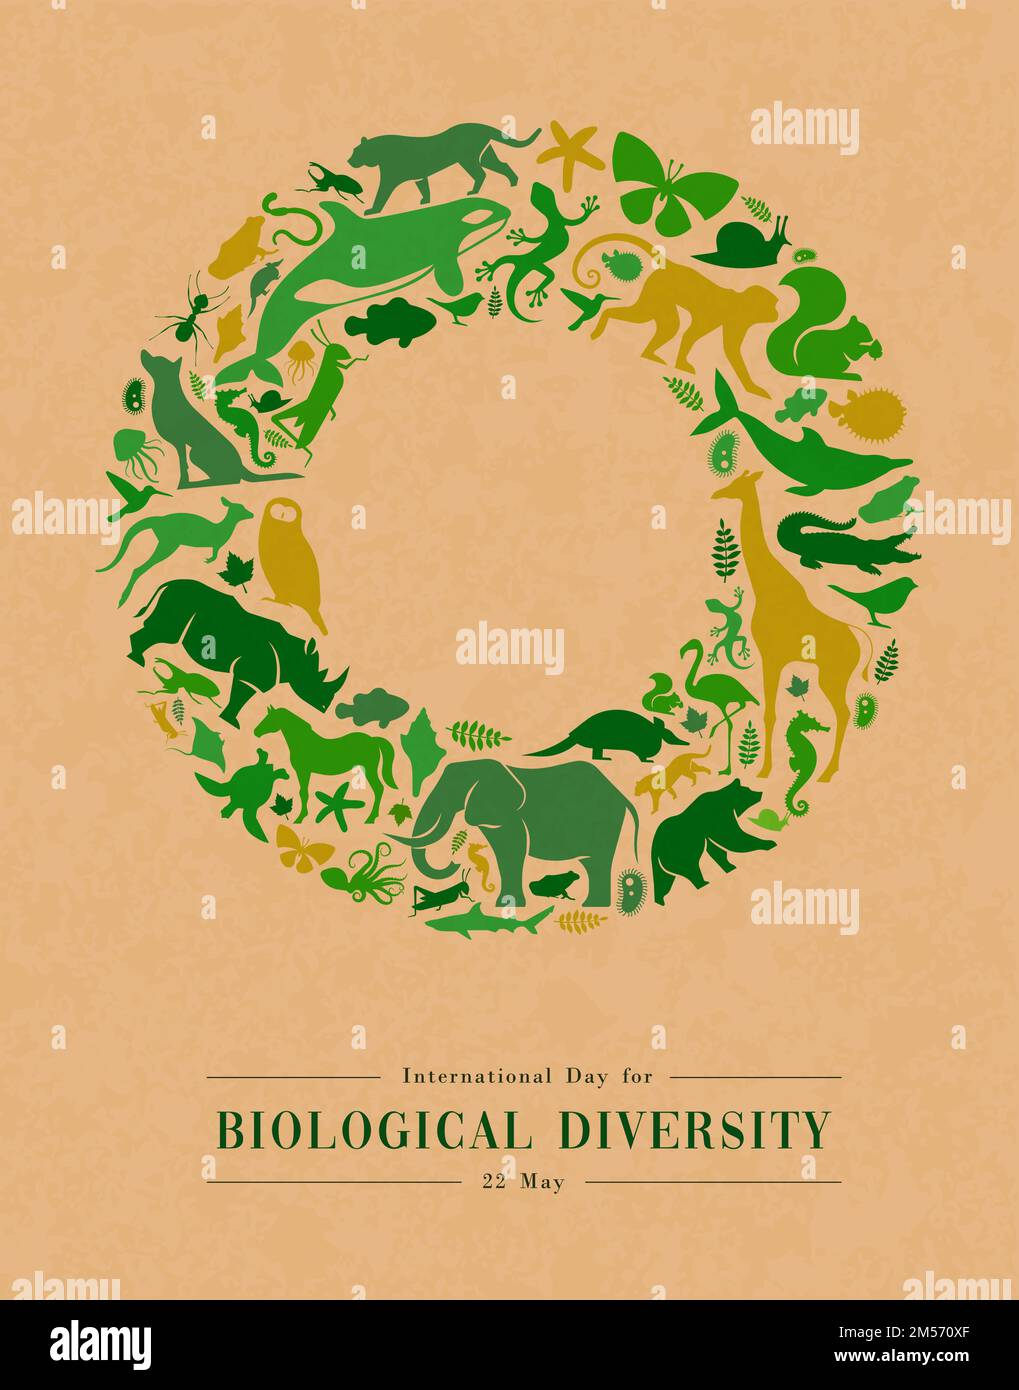 Green animal shape icon set illustration on recycled paper texture. Diverse wild animals silhouette circle frame for eco friendly concept or endangere Stock Vector